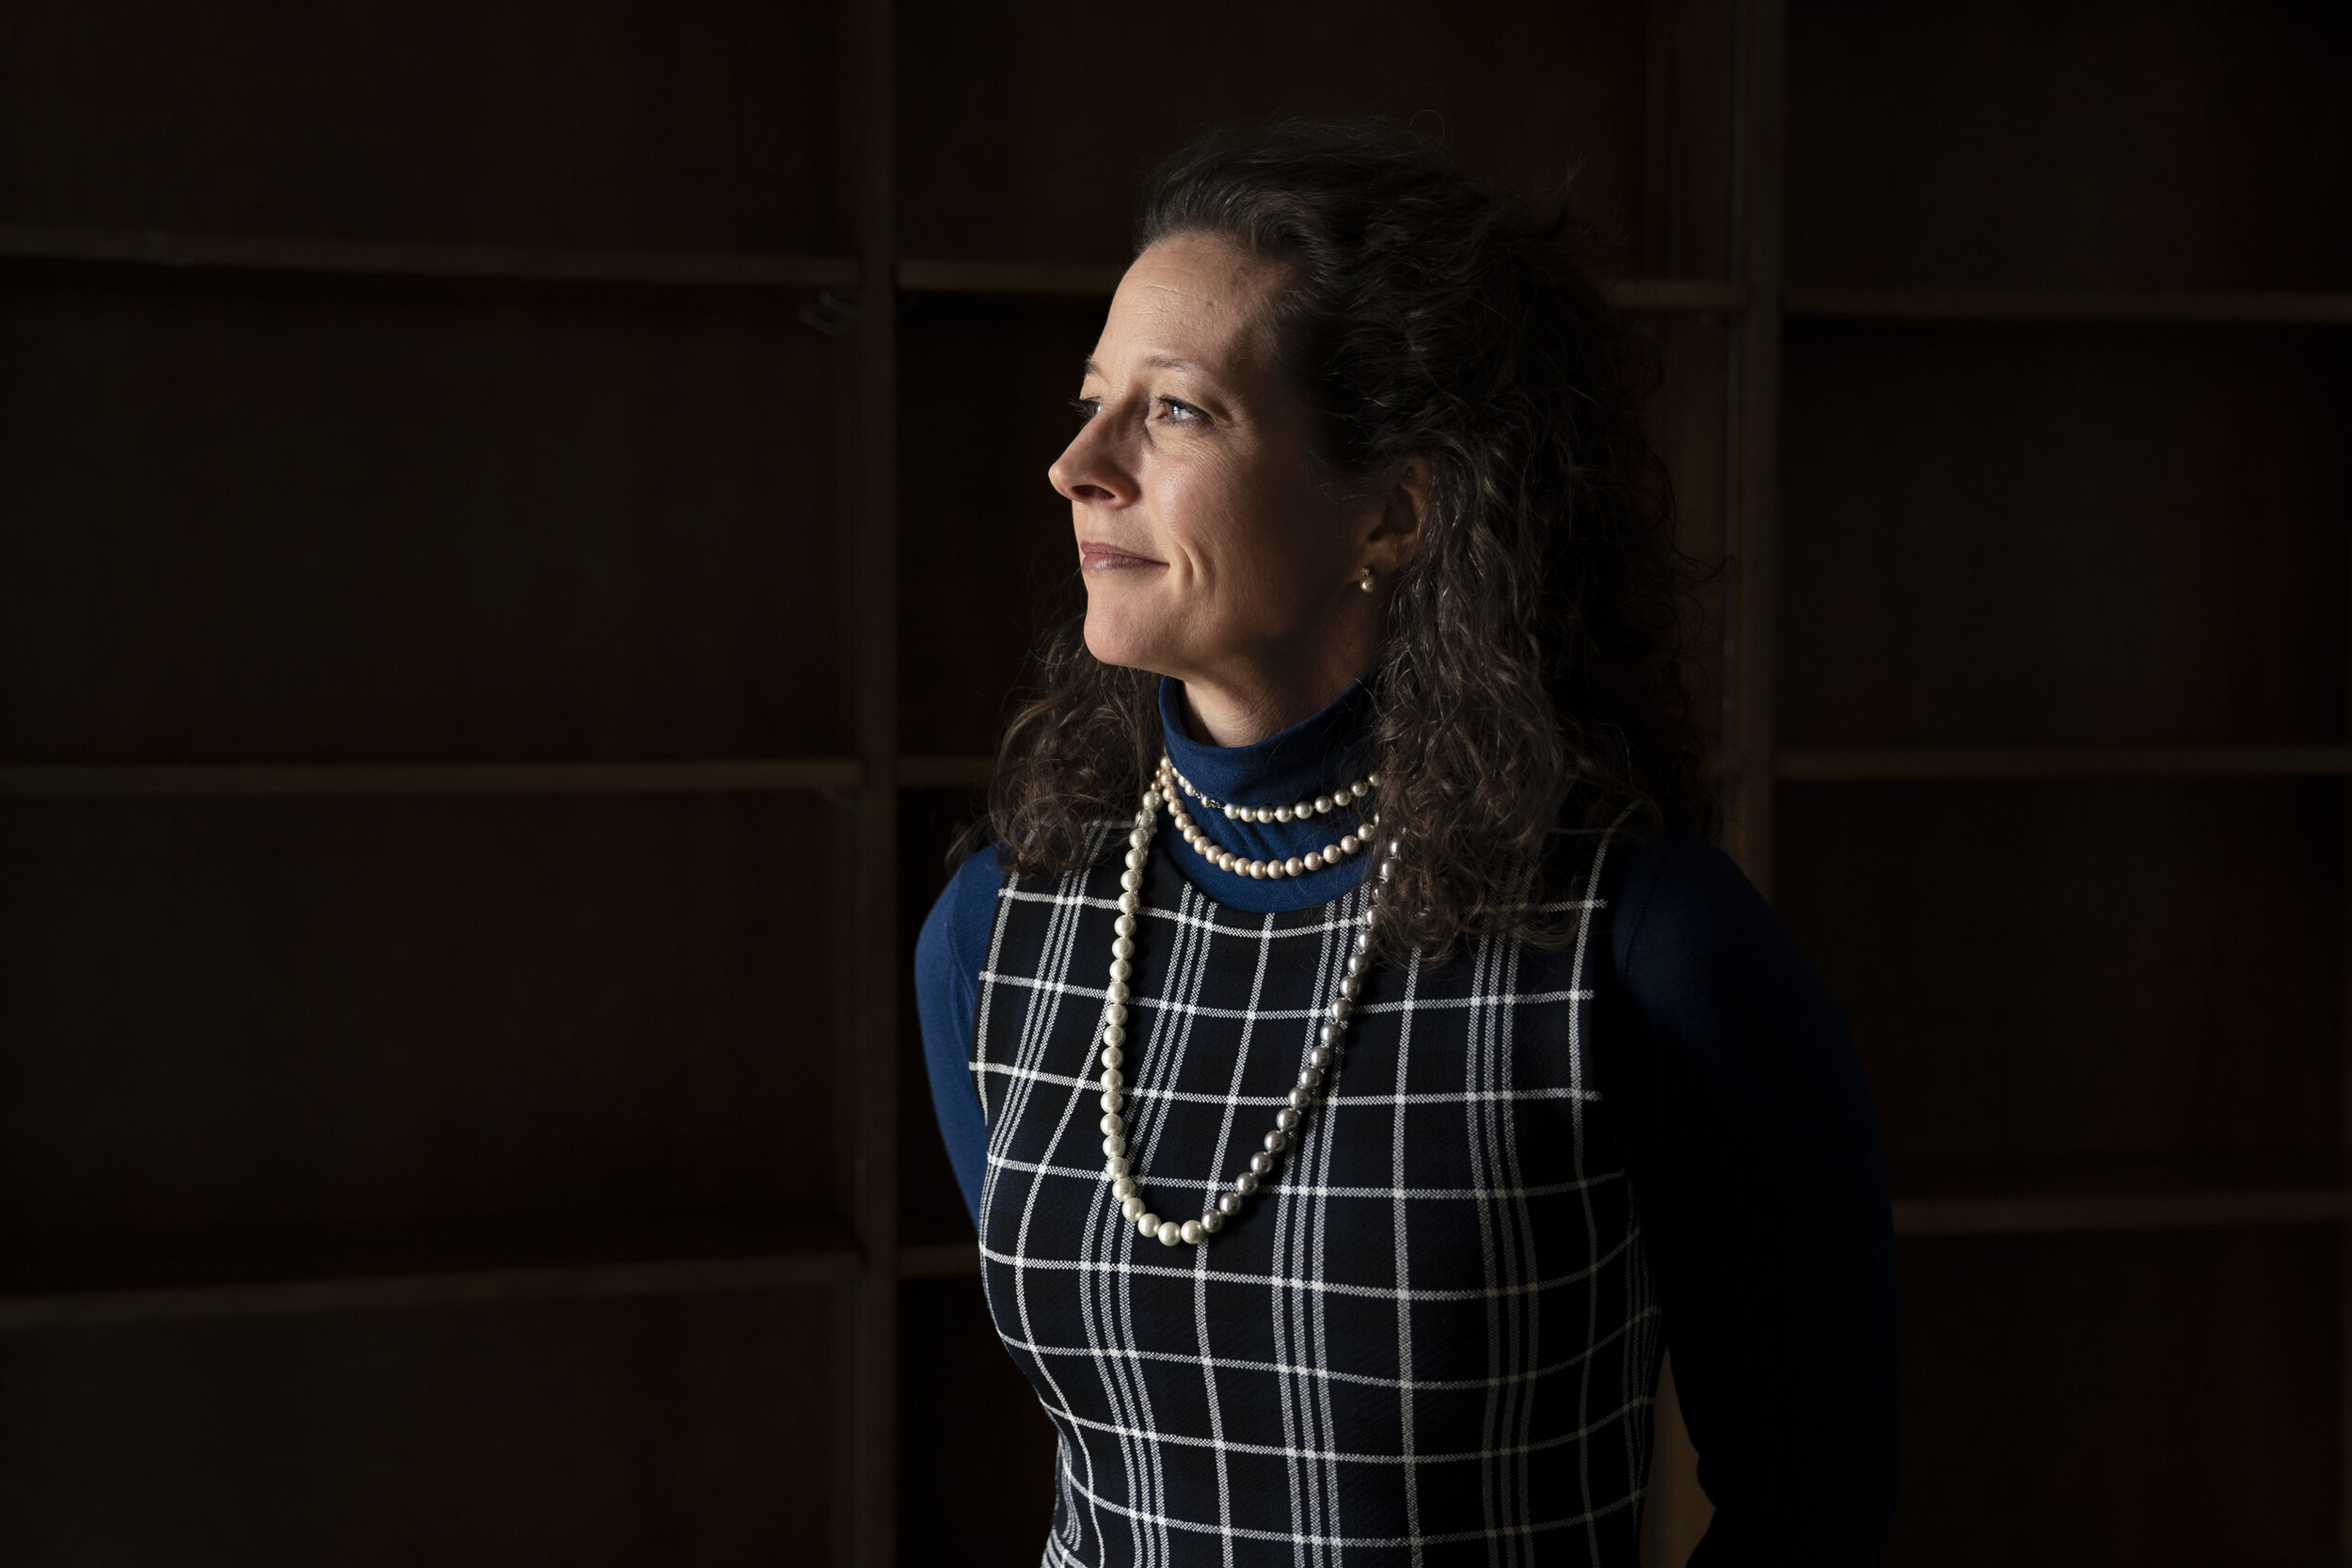  Amarillo Mayor Ginger Nelson poses for a portrait at city hall in Amarillo, Texas January 16, 2020. Nick Oxford for The New York Times 